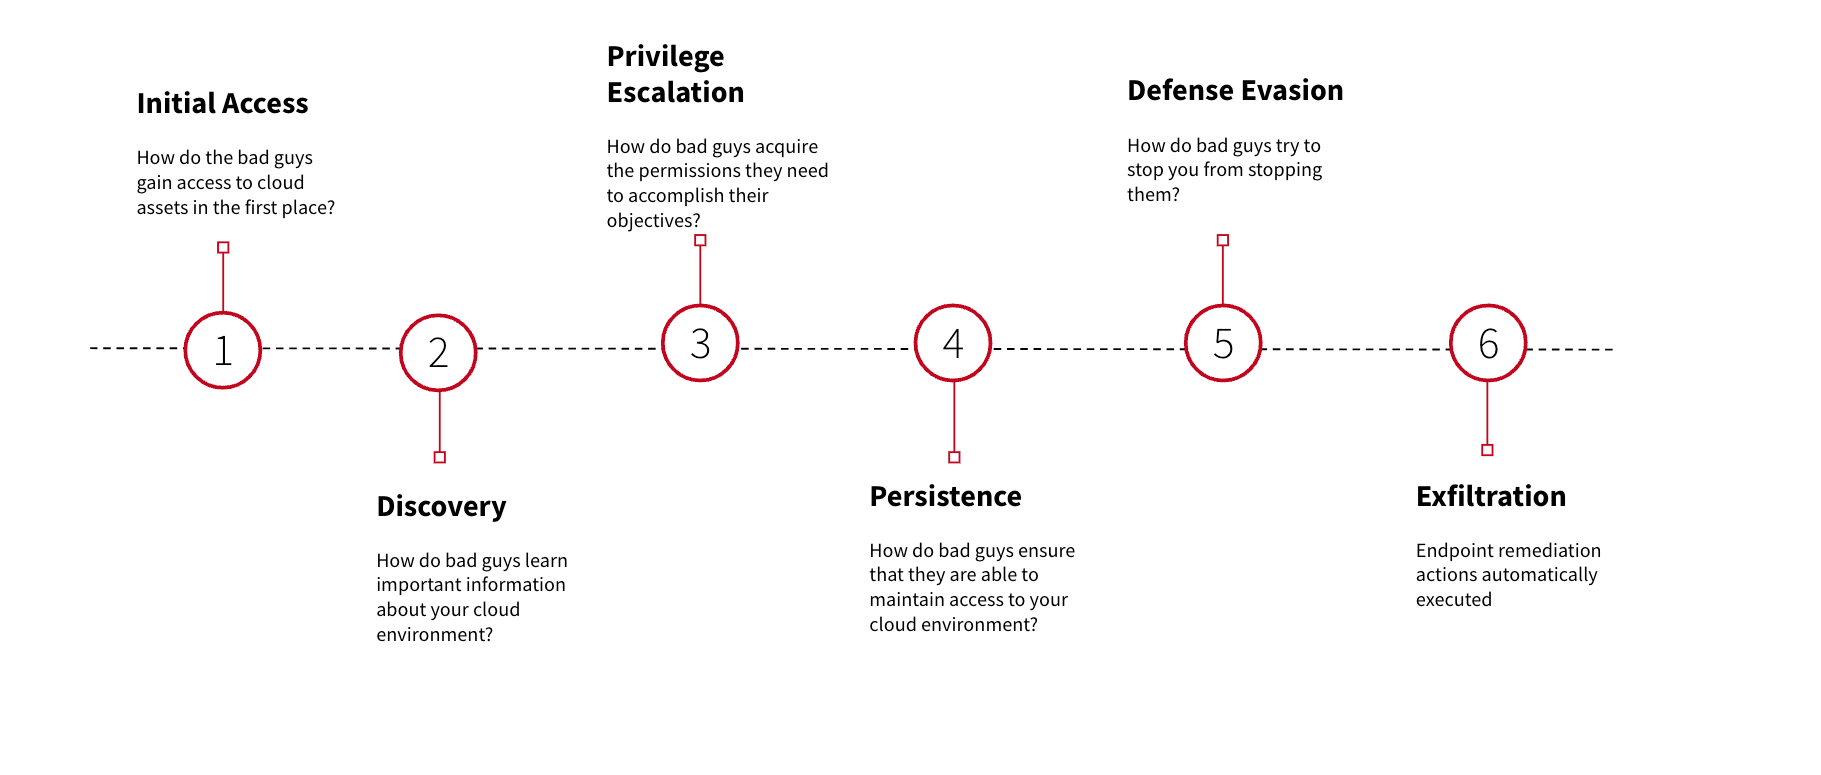 Initial access, Discovery, Privilege escalation, Persistence, Defense Evasion, and Exfiltration phases of a cloud intrusion